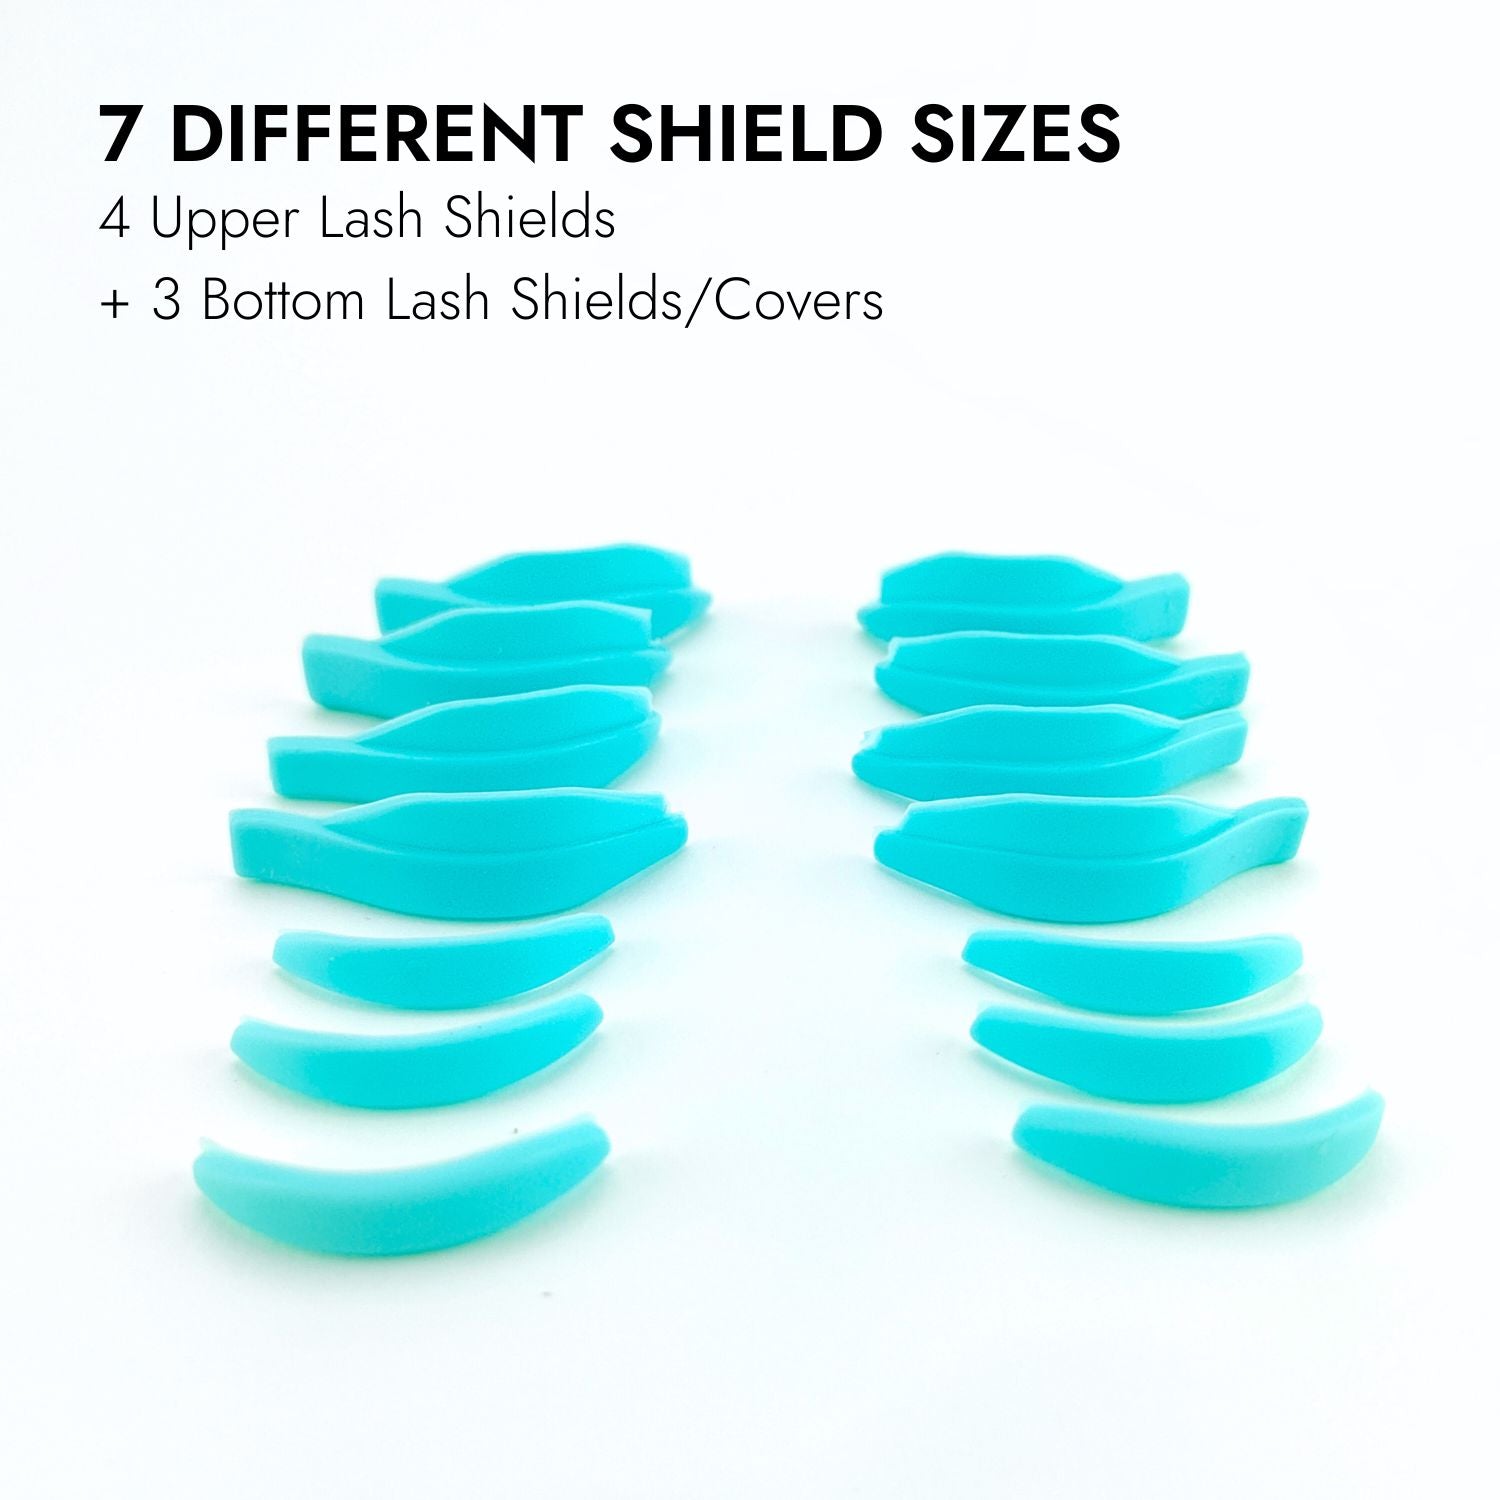 Soft Silicone Lash Lift Shields + Covers - My Lash Store